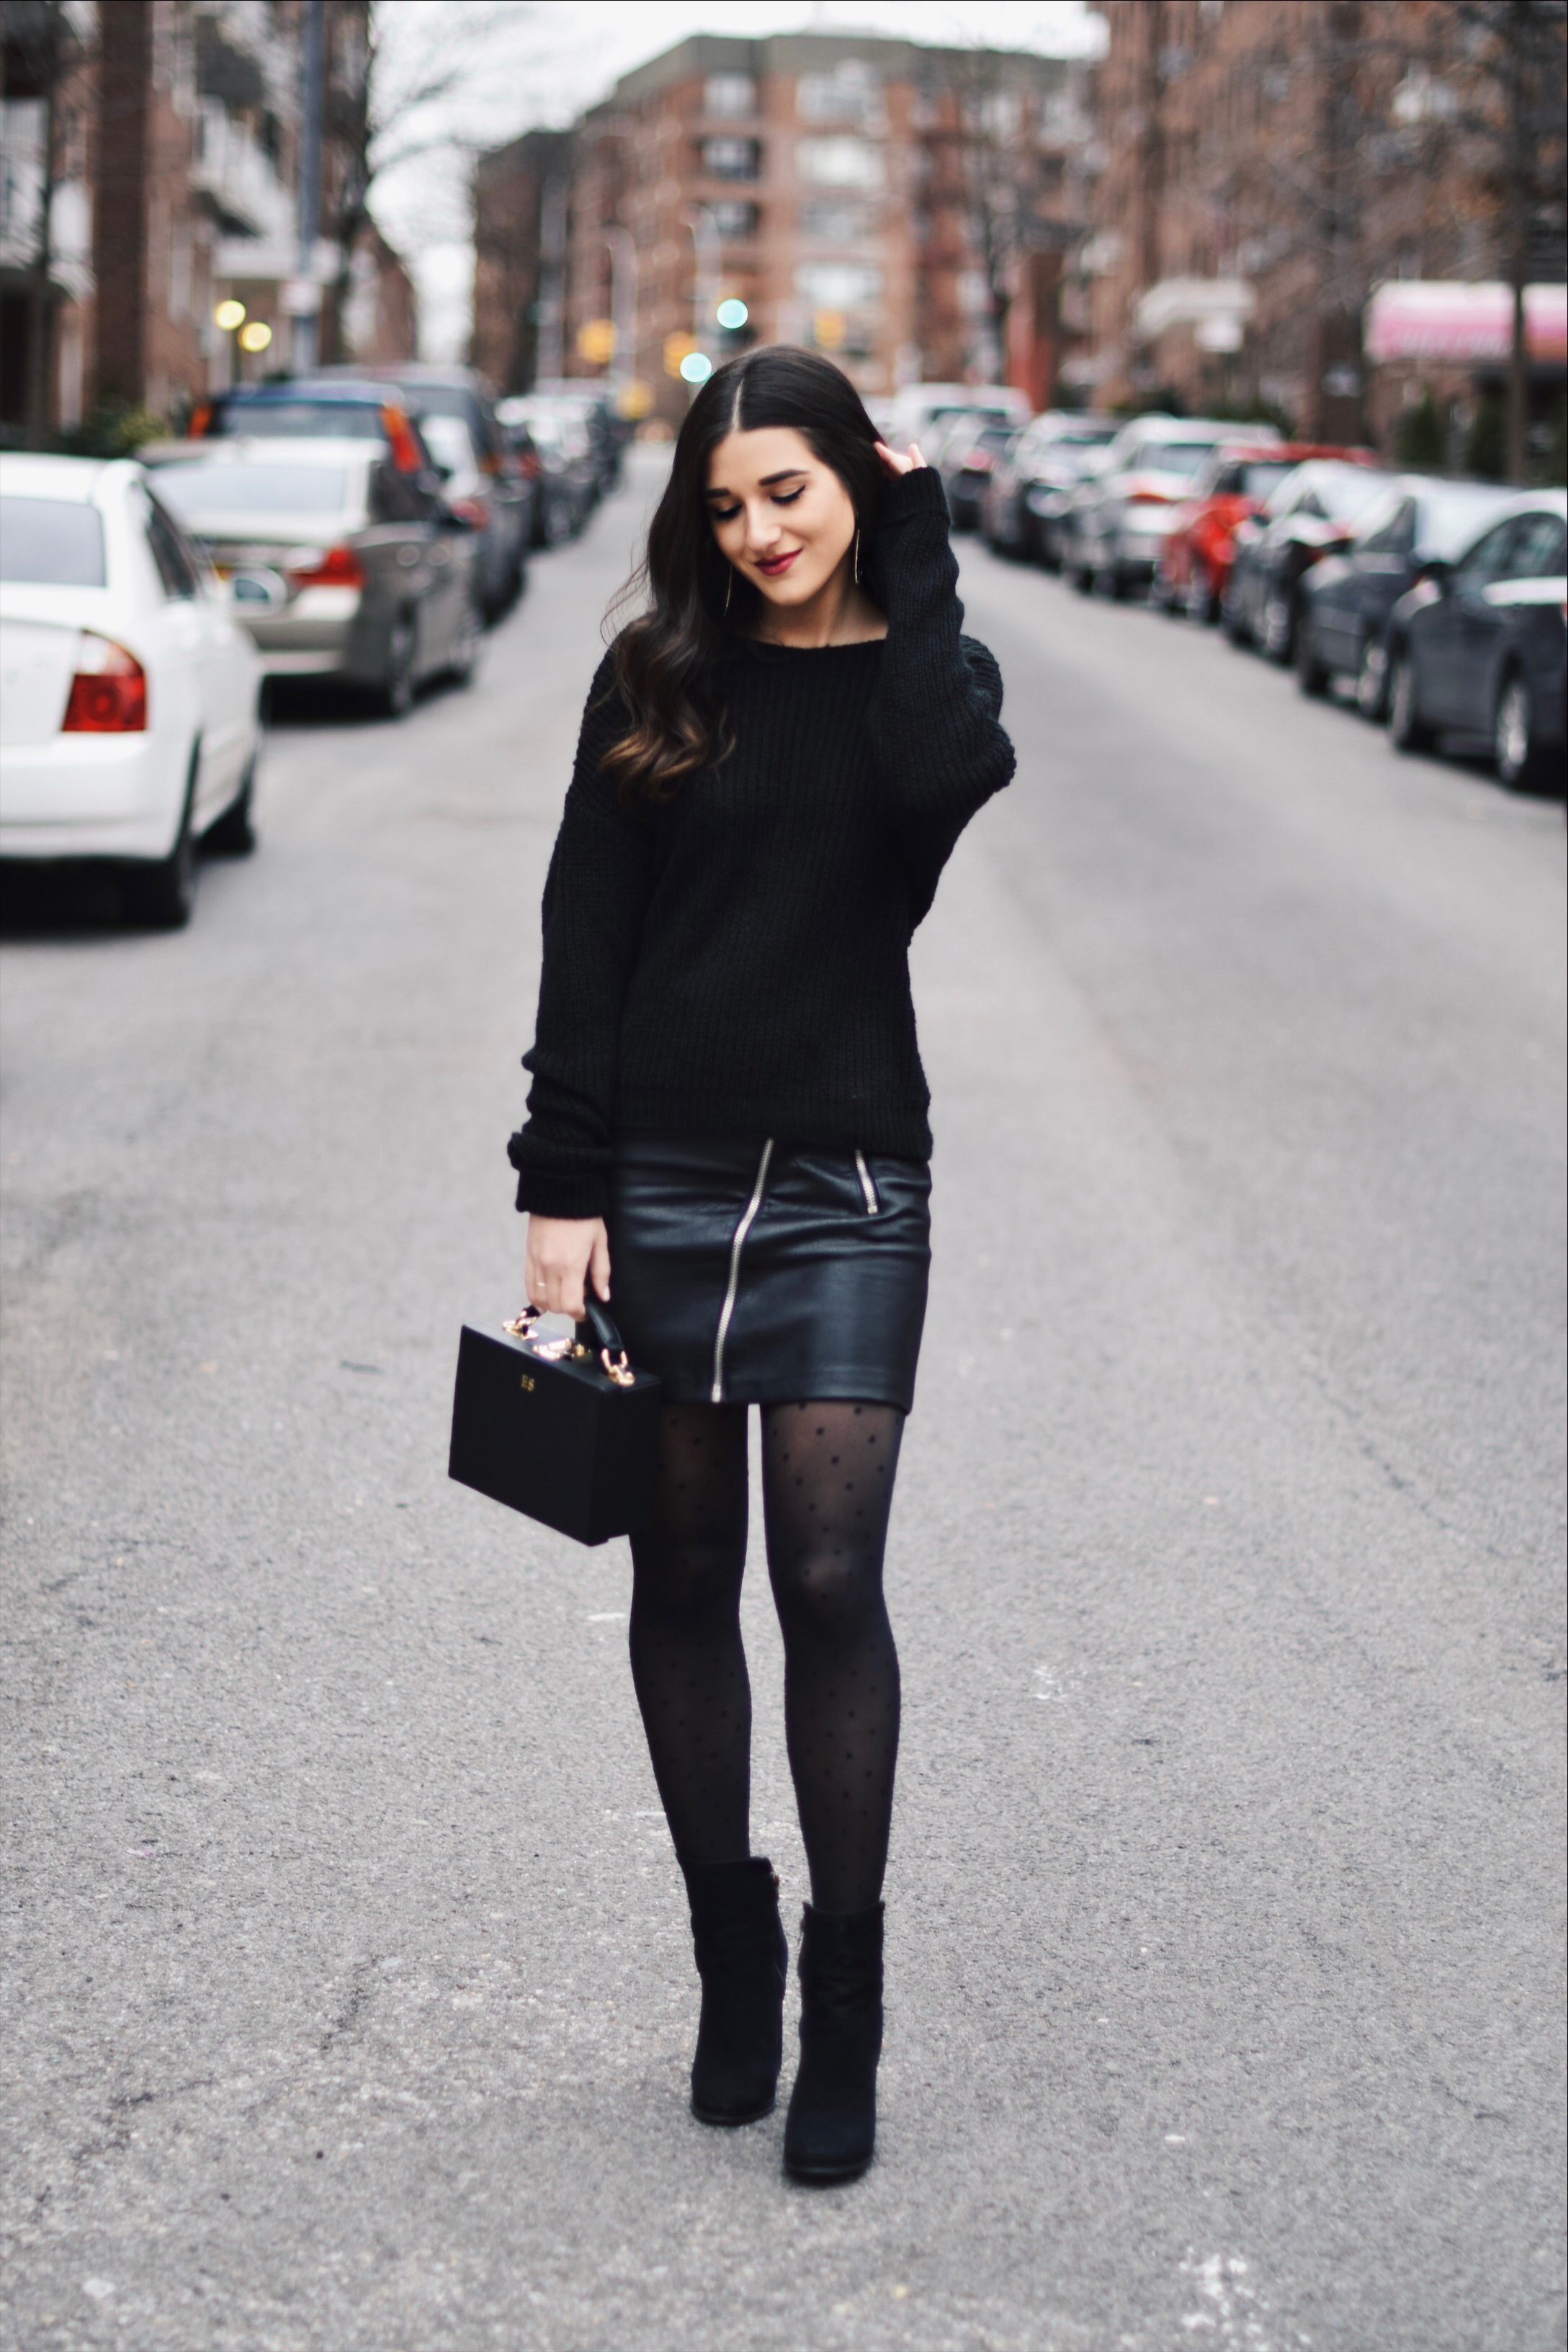 All Black Look 5 Ways To Keep Your New Year's Resolution Going Strong Esther Santer Fashion Blog NYC Street Style Blogger Outfit OOTD Trendy BaubleBar Earrings Monogrammed Box Bag Daily Edited Girl Women Booties Pleather Mini Skirt Polka Dot  Tights.jpg